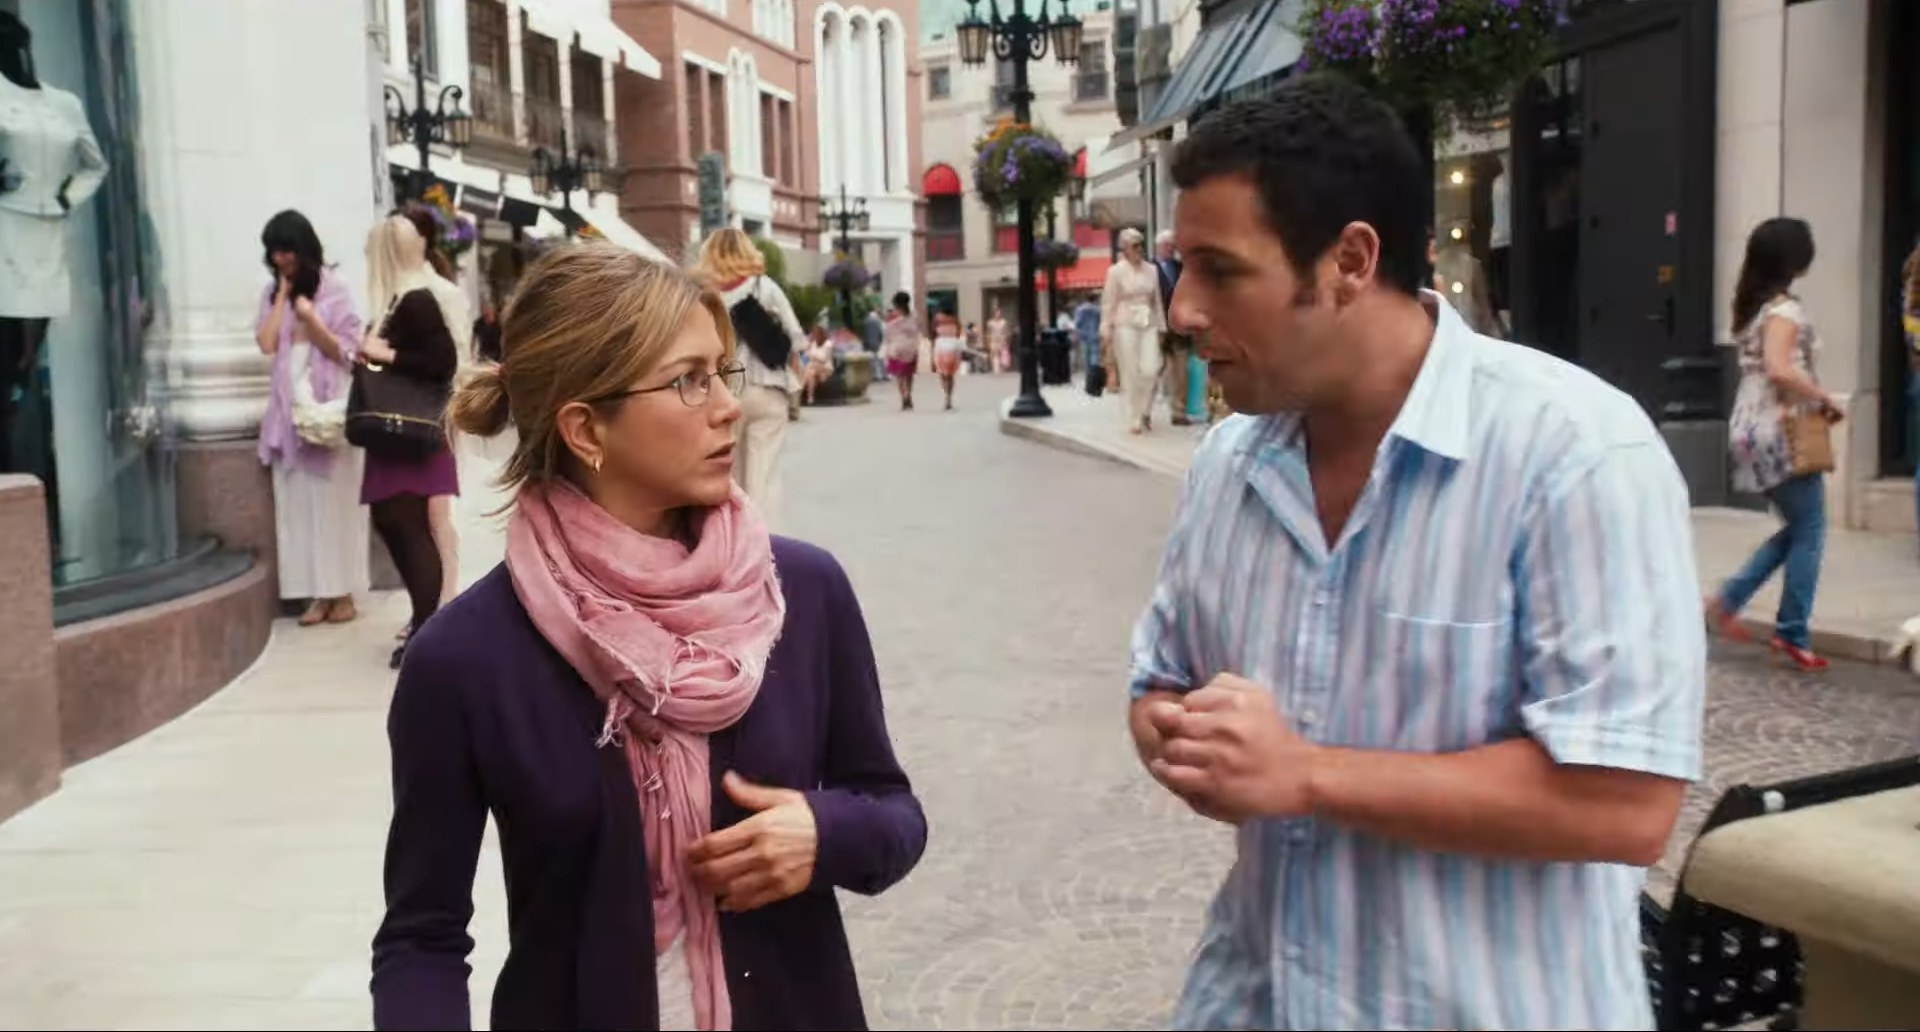 Jennifer Aniston and Adam Sandler&#x27;s characters are walking down the street